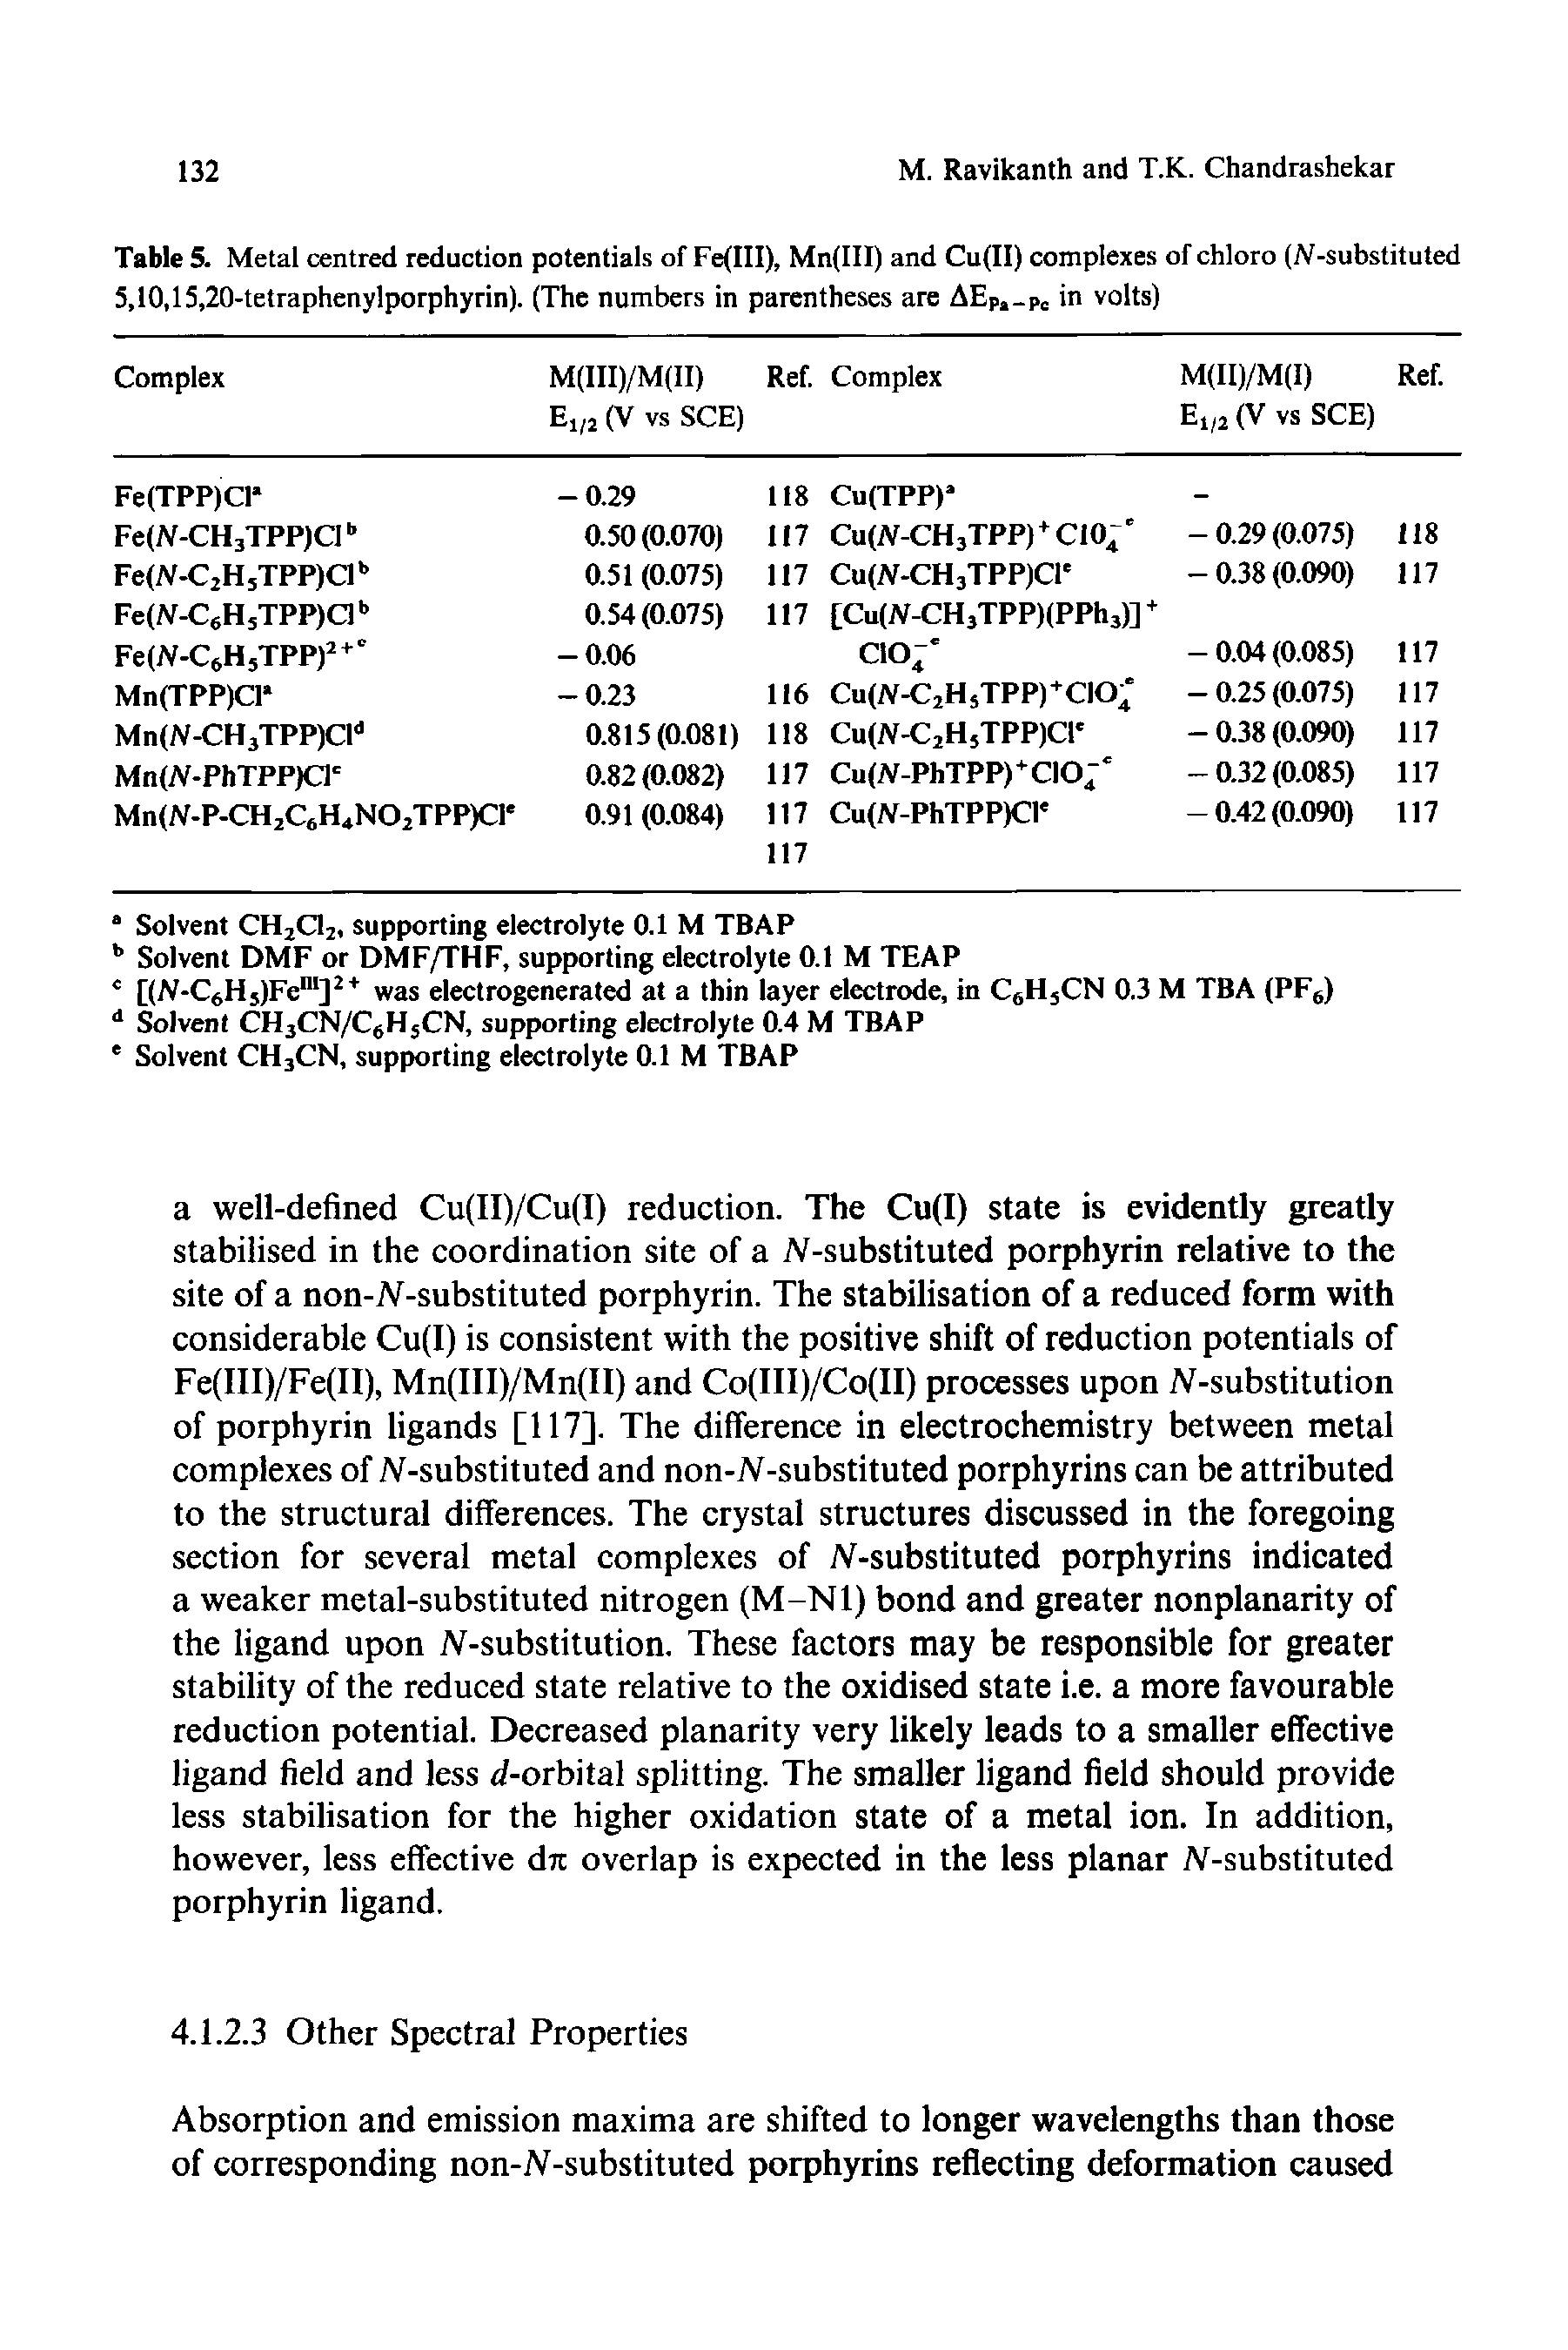 Table 5. Metal centred reduction potentials of Fe(III), Mn(III) and Cu(II) complexes of chloro (N-substituted 5,10,15,20-tetraphenylporphyrin). (The numbers in parentheses are AEpa Pc in volts)...